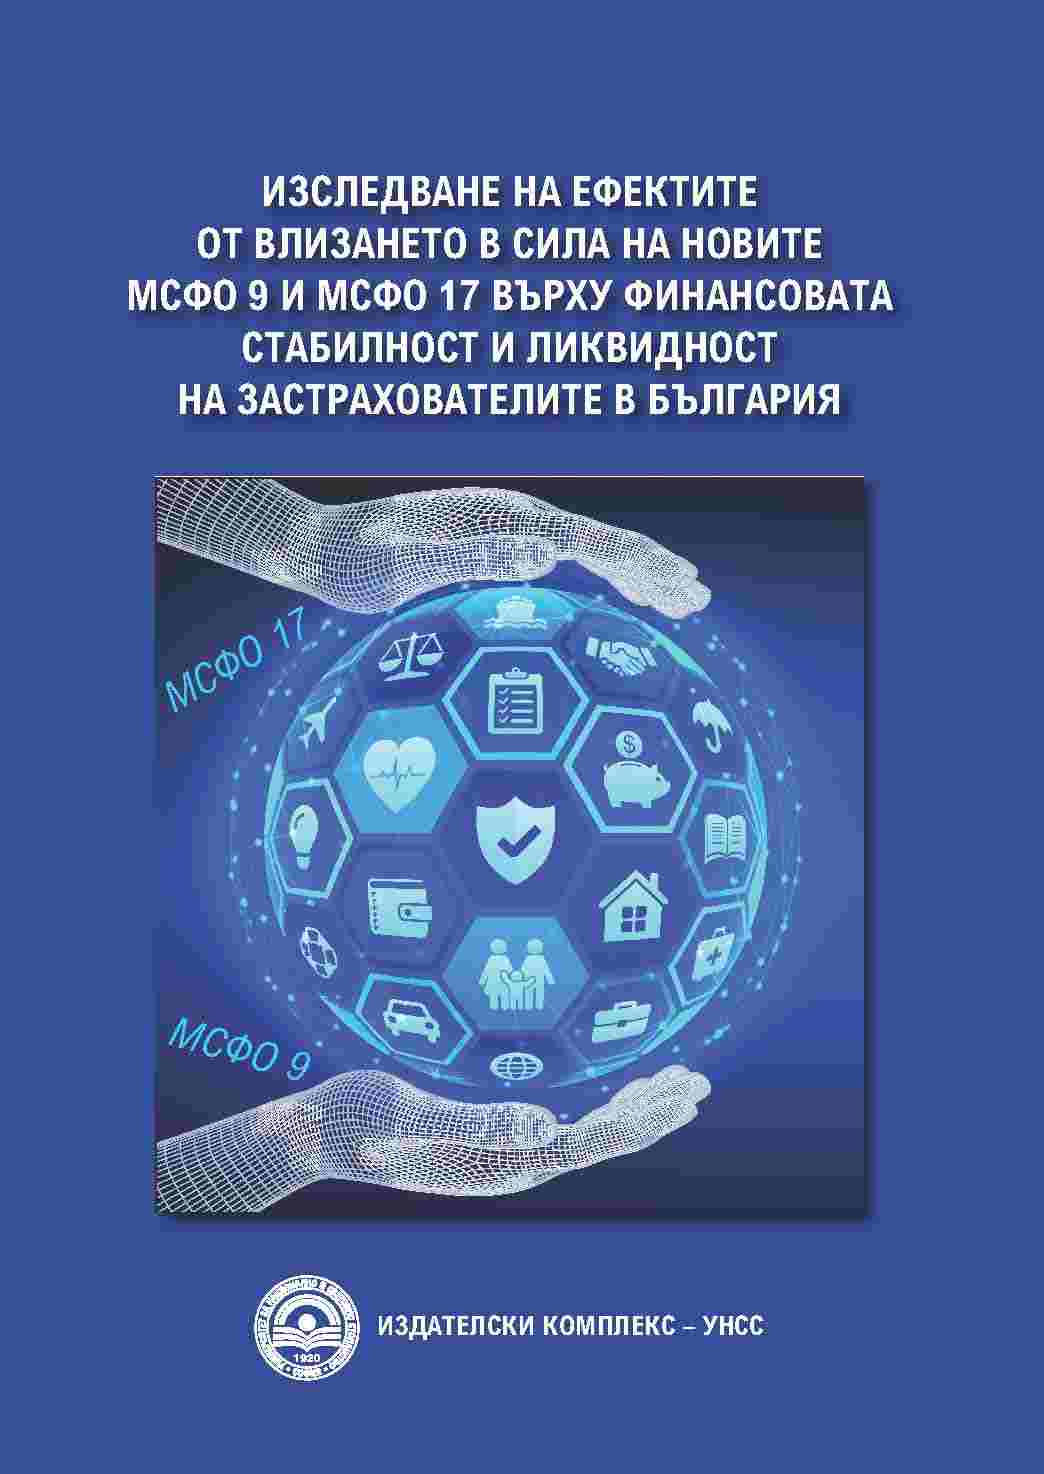 Study of the Effects of the Entry into Force of the New International Financial Reporting Standards - 9 Financial Instruments and 17 Insurance Contracts on the Financial Stability and Liquidity of Insurers in Bulgaria Cover Image